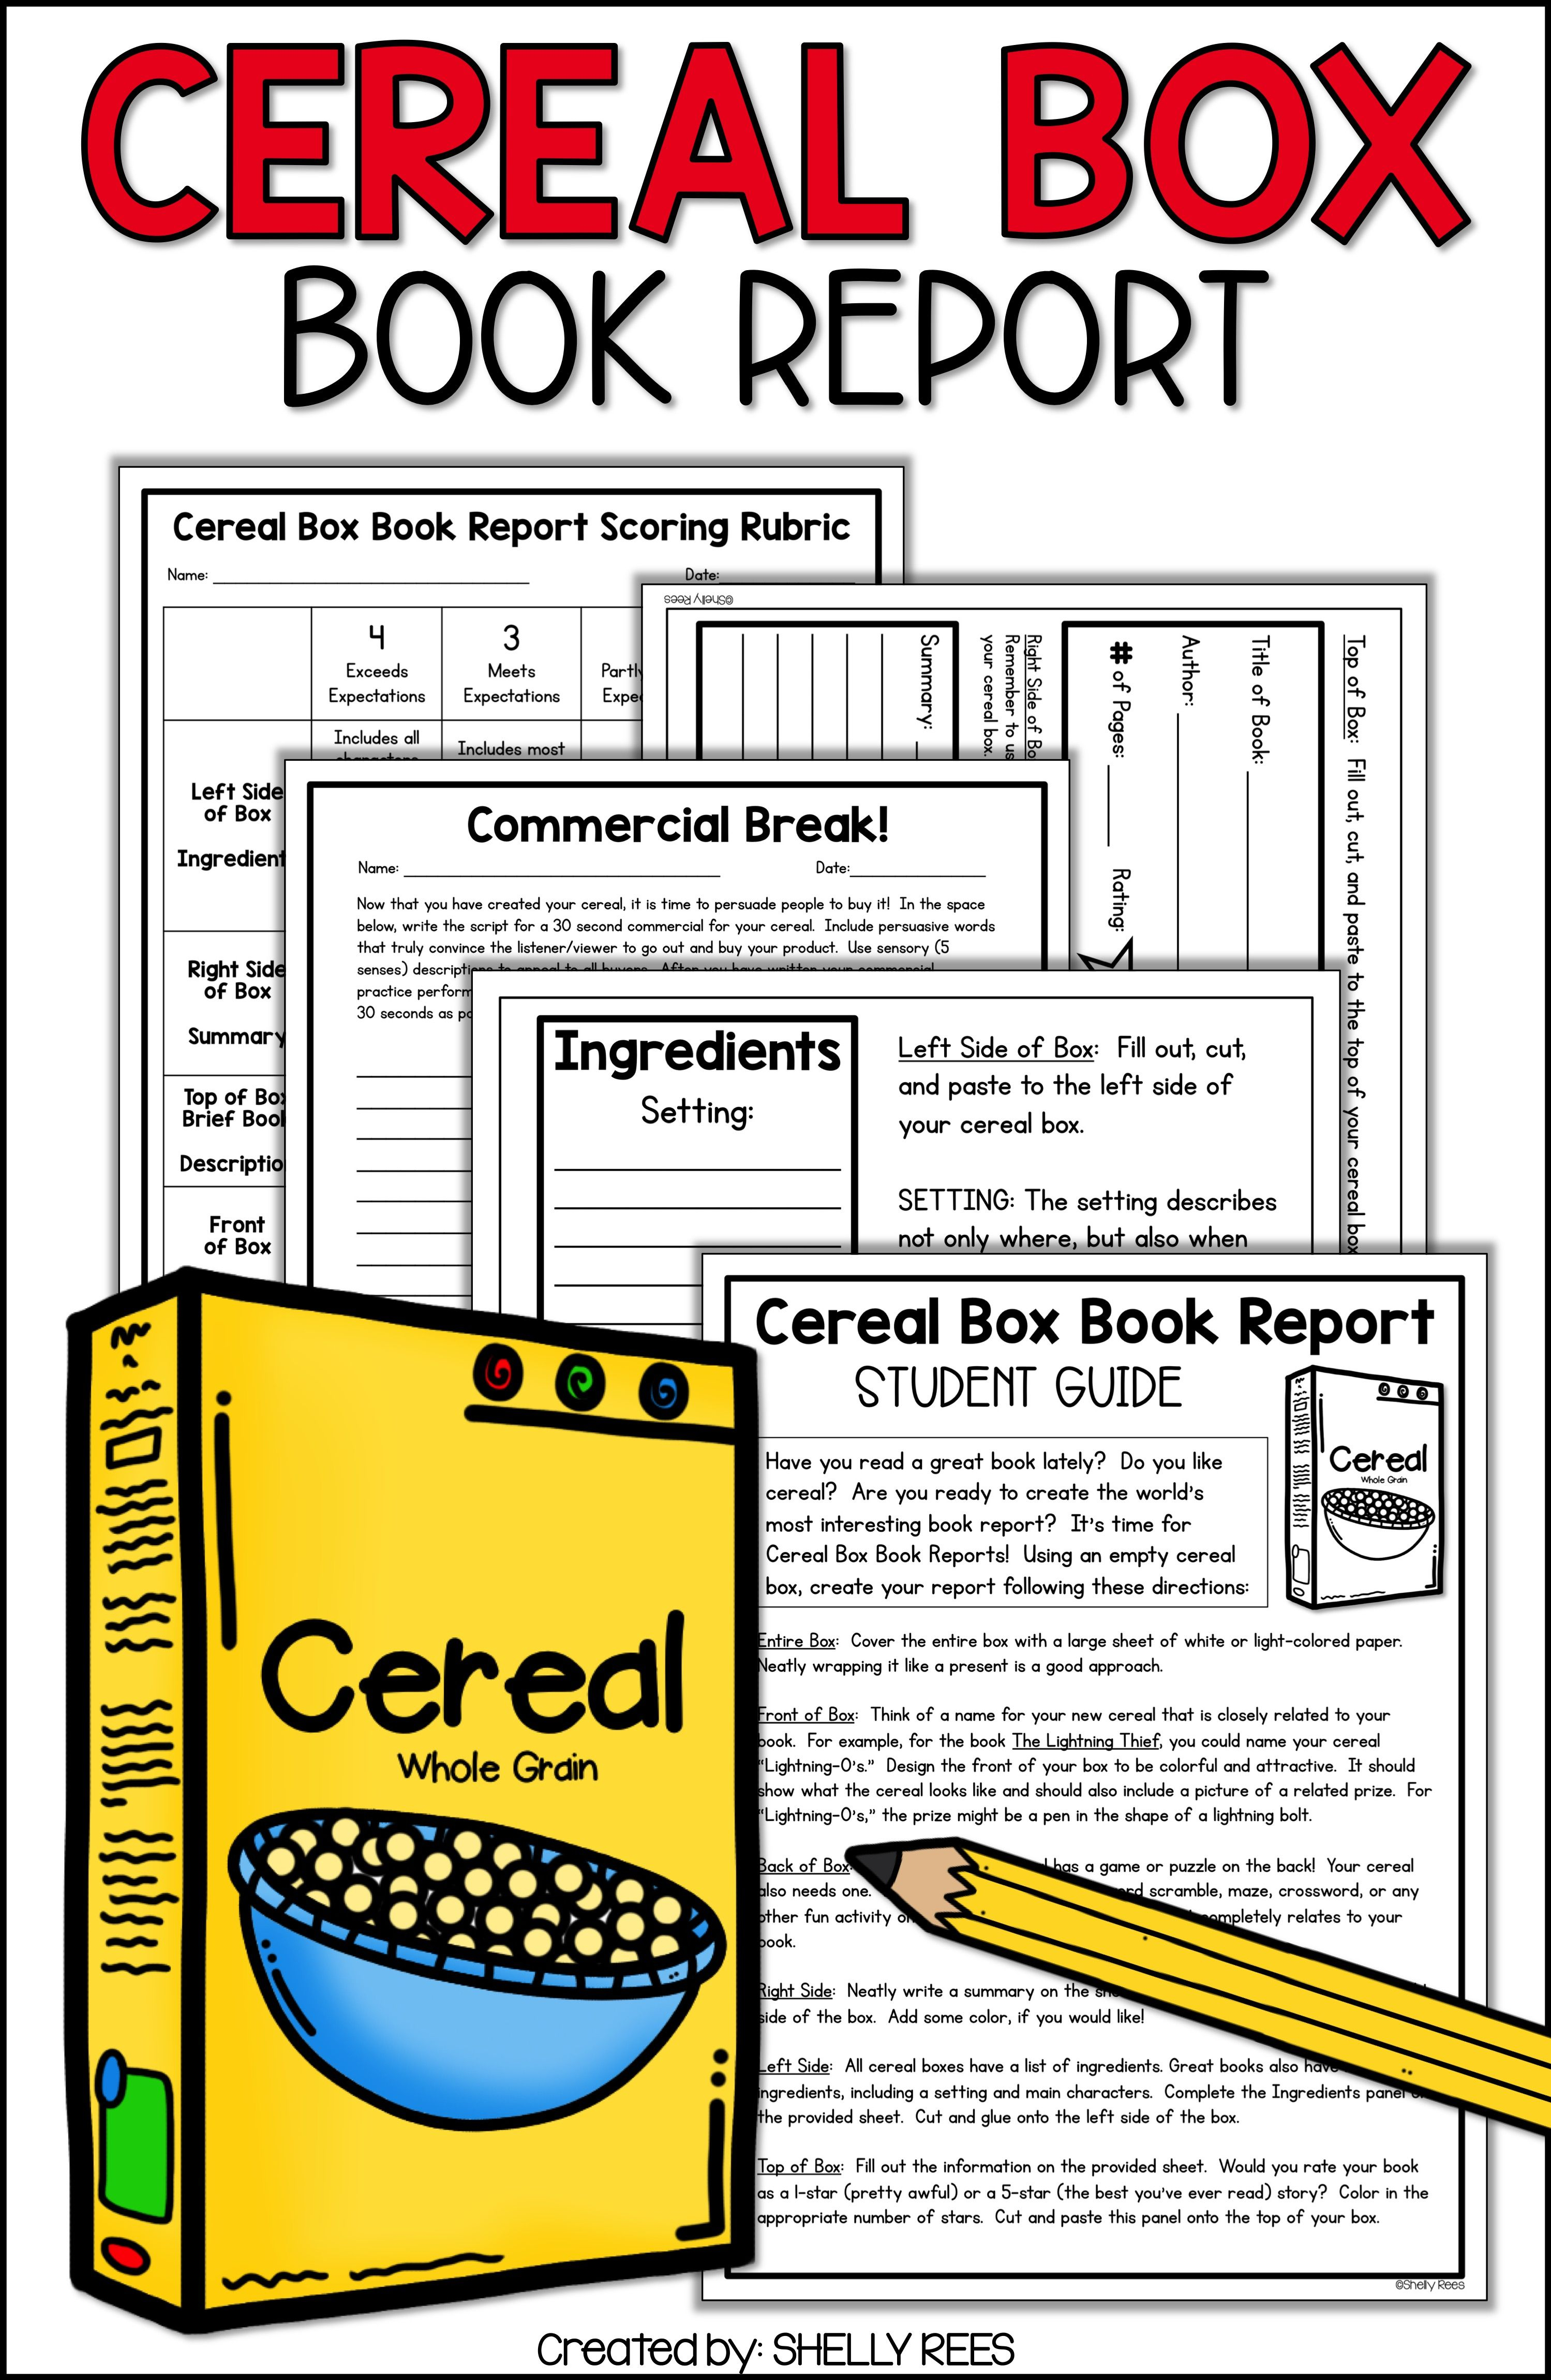 Cereal Box Book Report Kit | Shelly Rees Teaching Resources Intended For Cereal Box Book Report Template